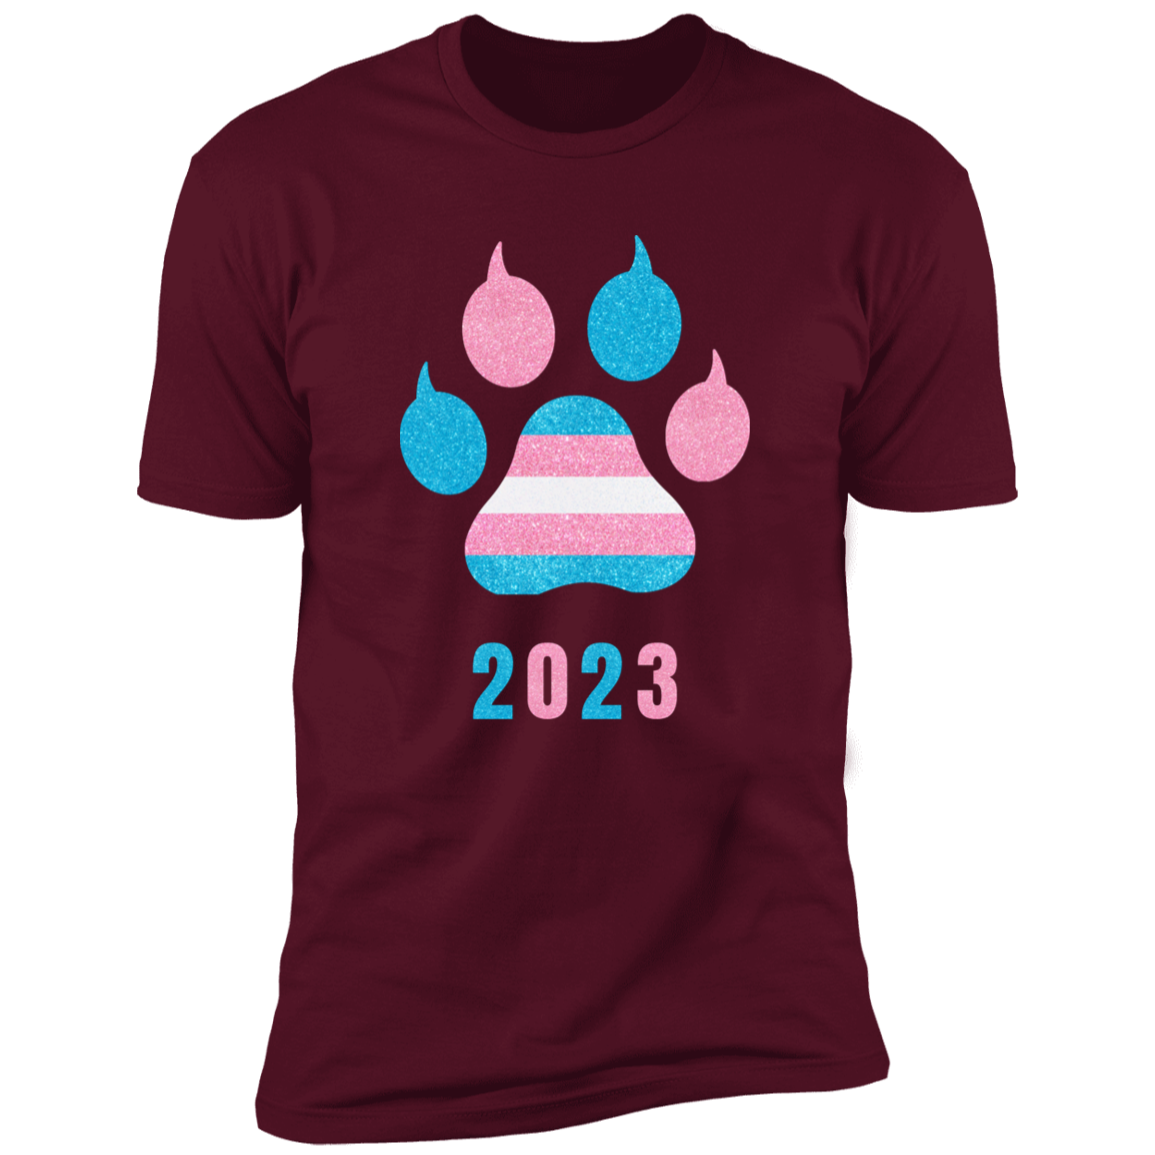 Trans Pride 2023 Cat Paw trans pride t-shirt,  trans cat paw pride shirt for humans, in maroon